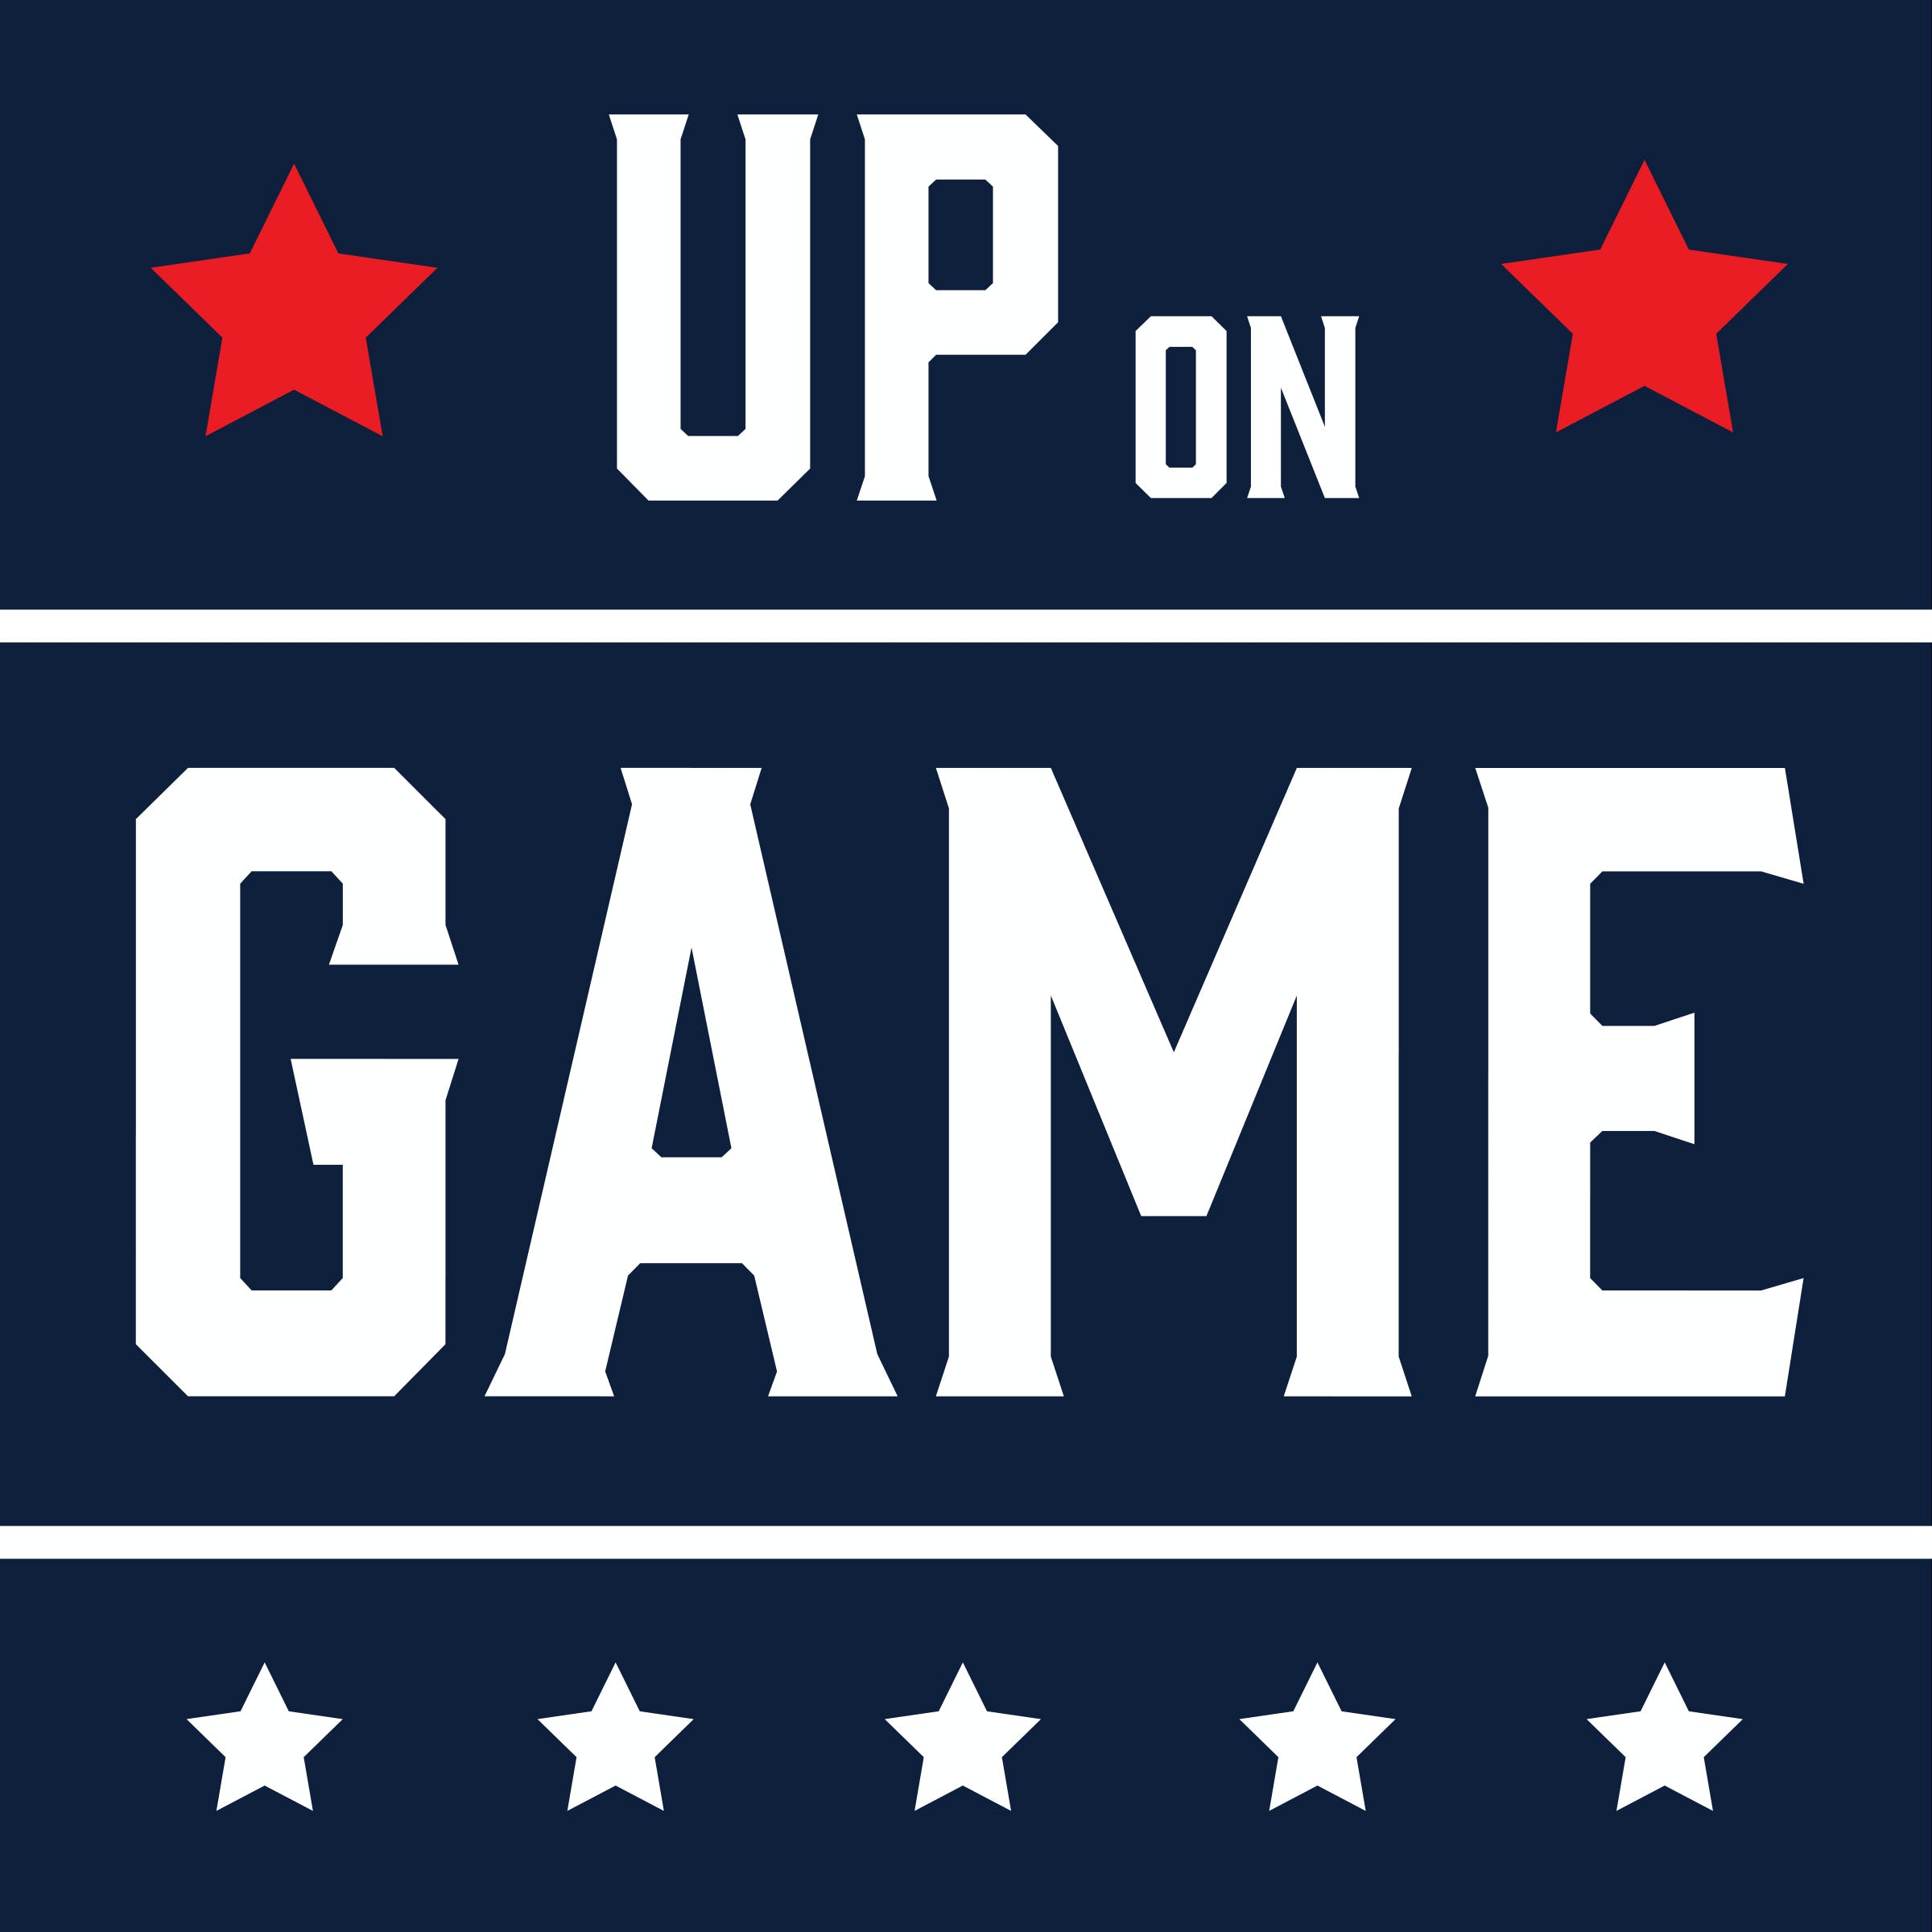 Up On Game: Hour 2 - The Dallas Cowboys Are Not A Playoff Team